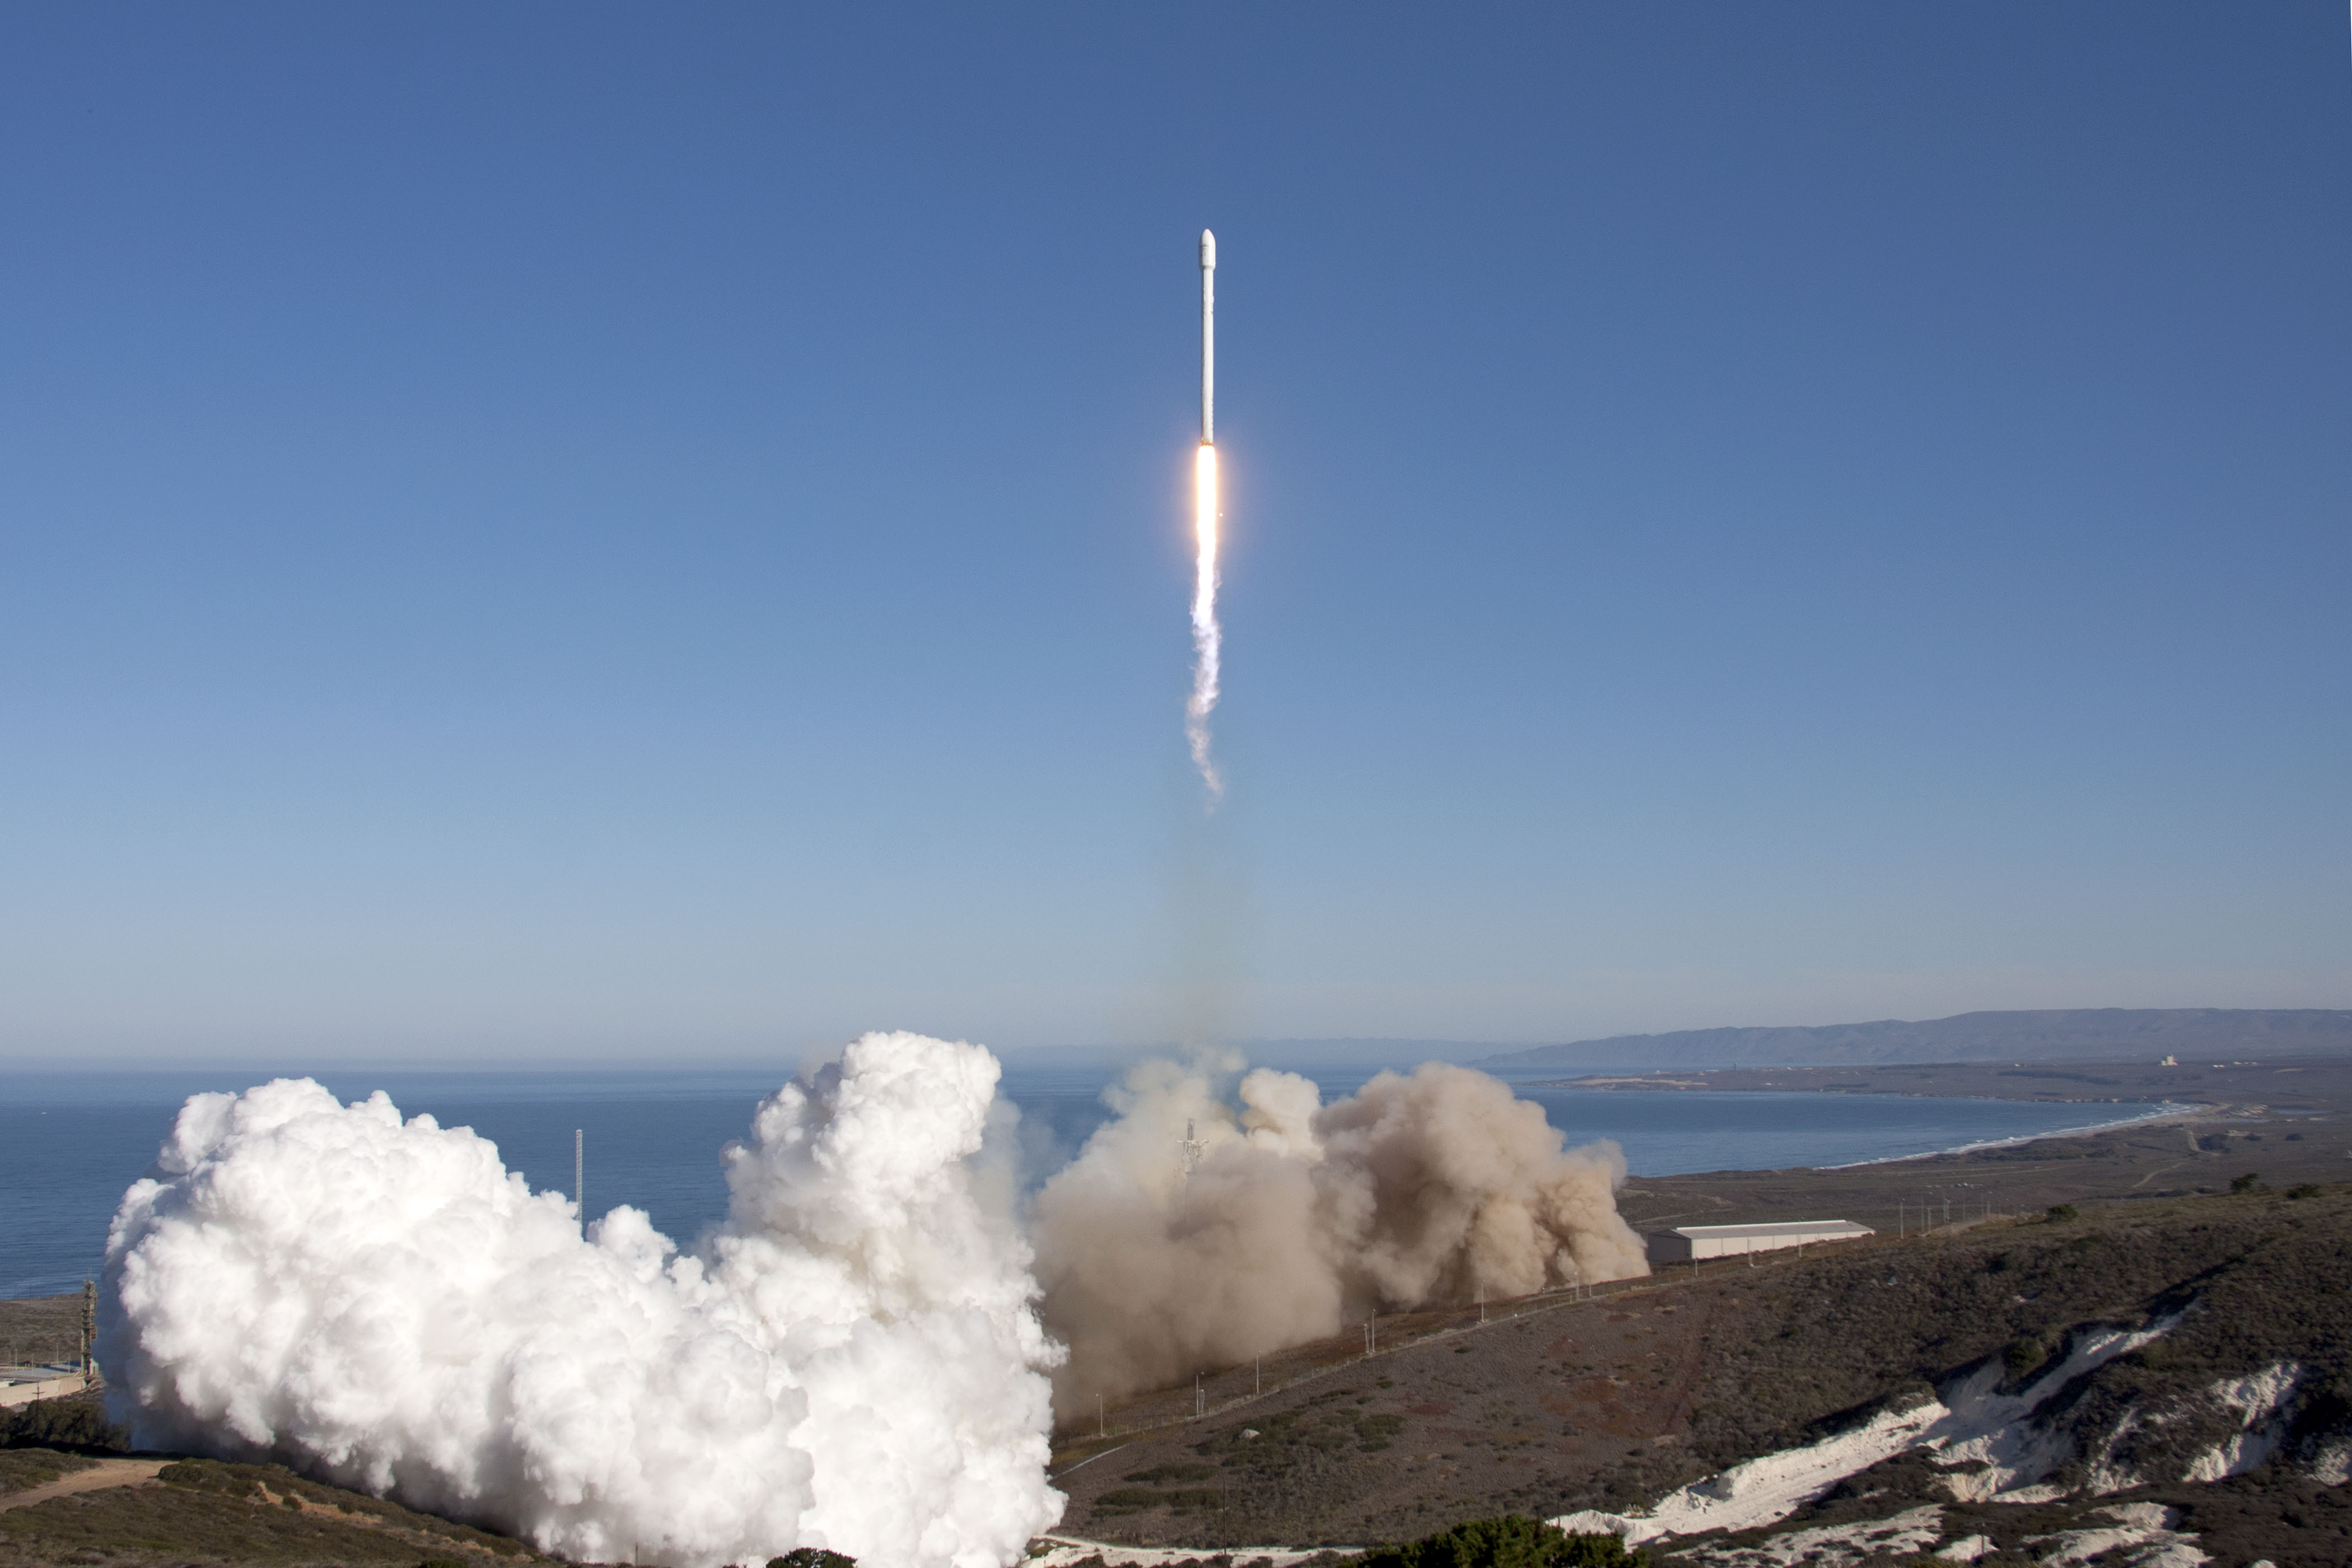 SpaceX launches upgraded Falcon 9 rocket | Space News ...
